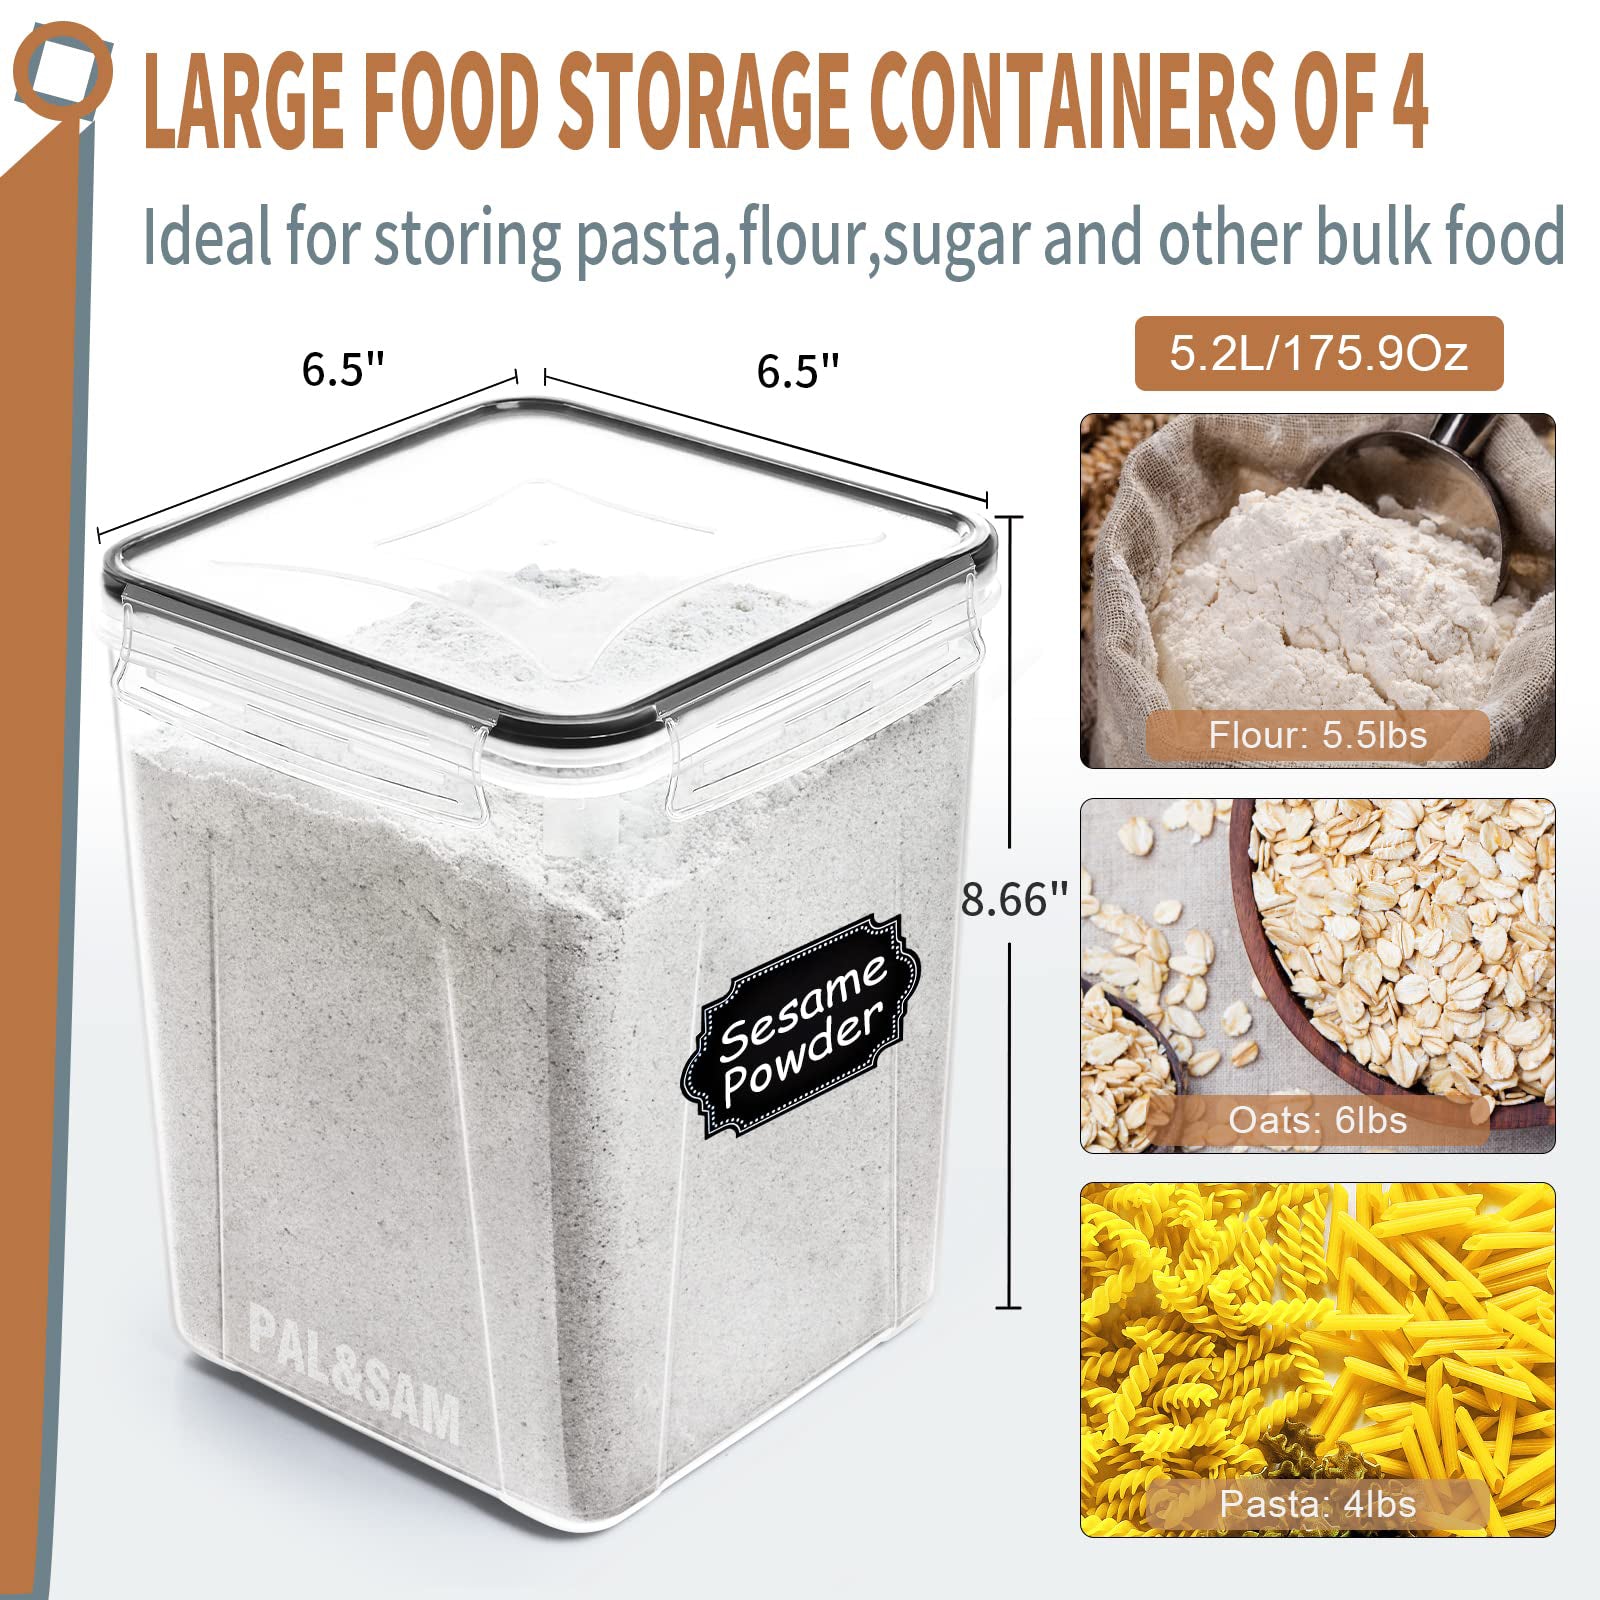 PAL&SAM Large Airtight Food Storage Containers